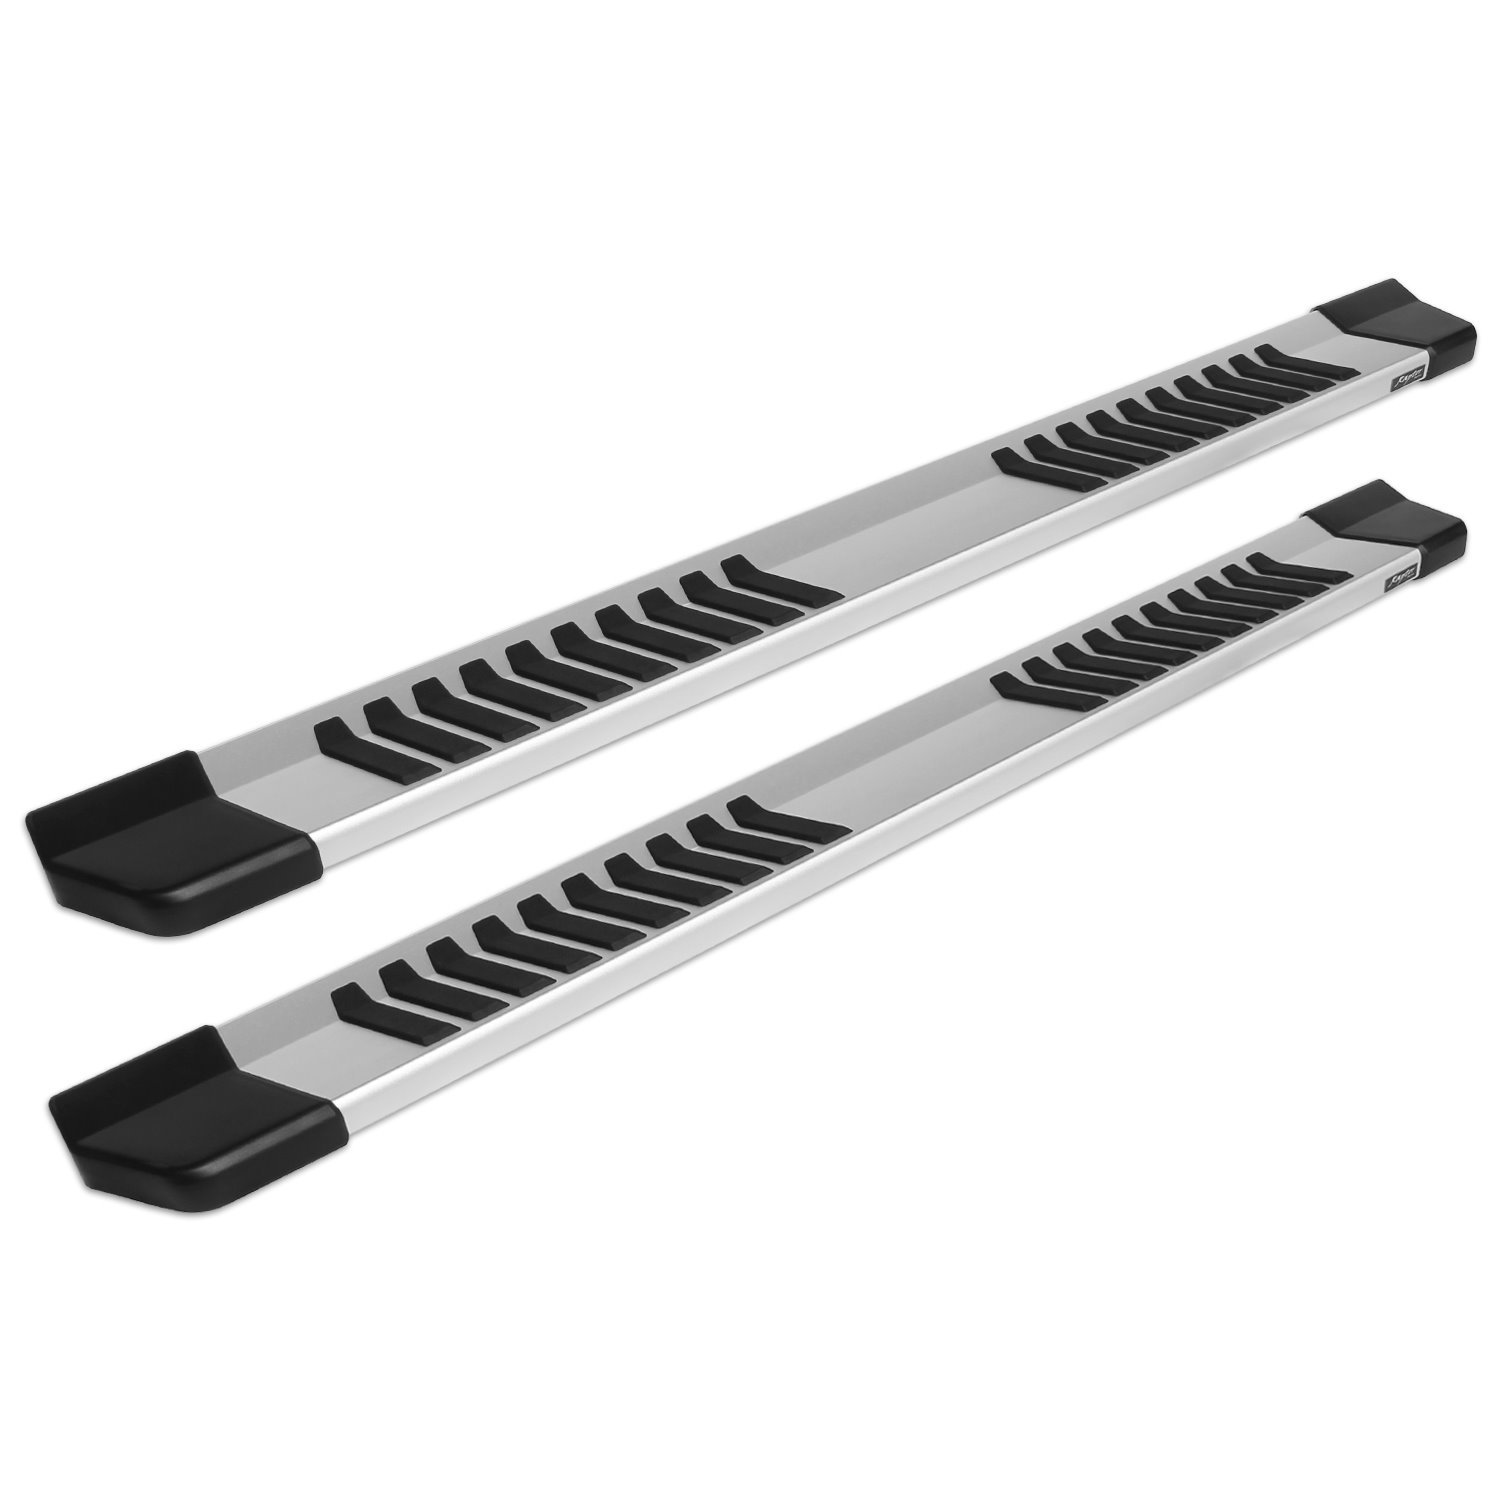 1703-0343 Raptor Series 6 in OEM Style Slide Track Running Boards, Brushed Aluminum, 99-16 Ford F-250/F-350 Super Duty SuperCab